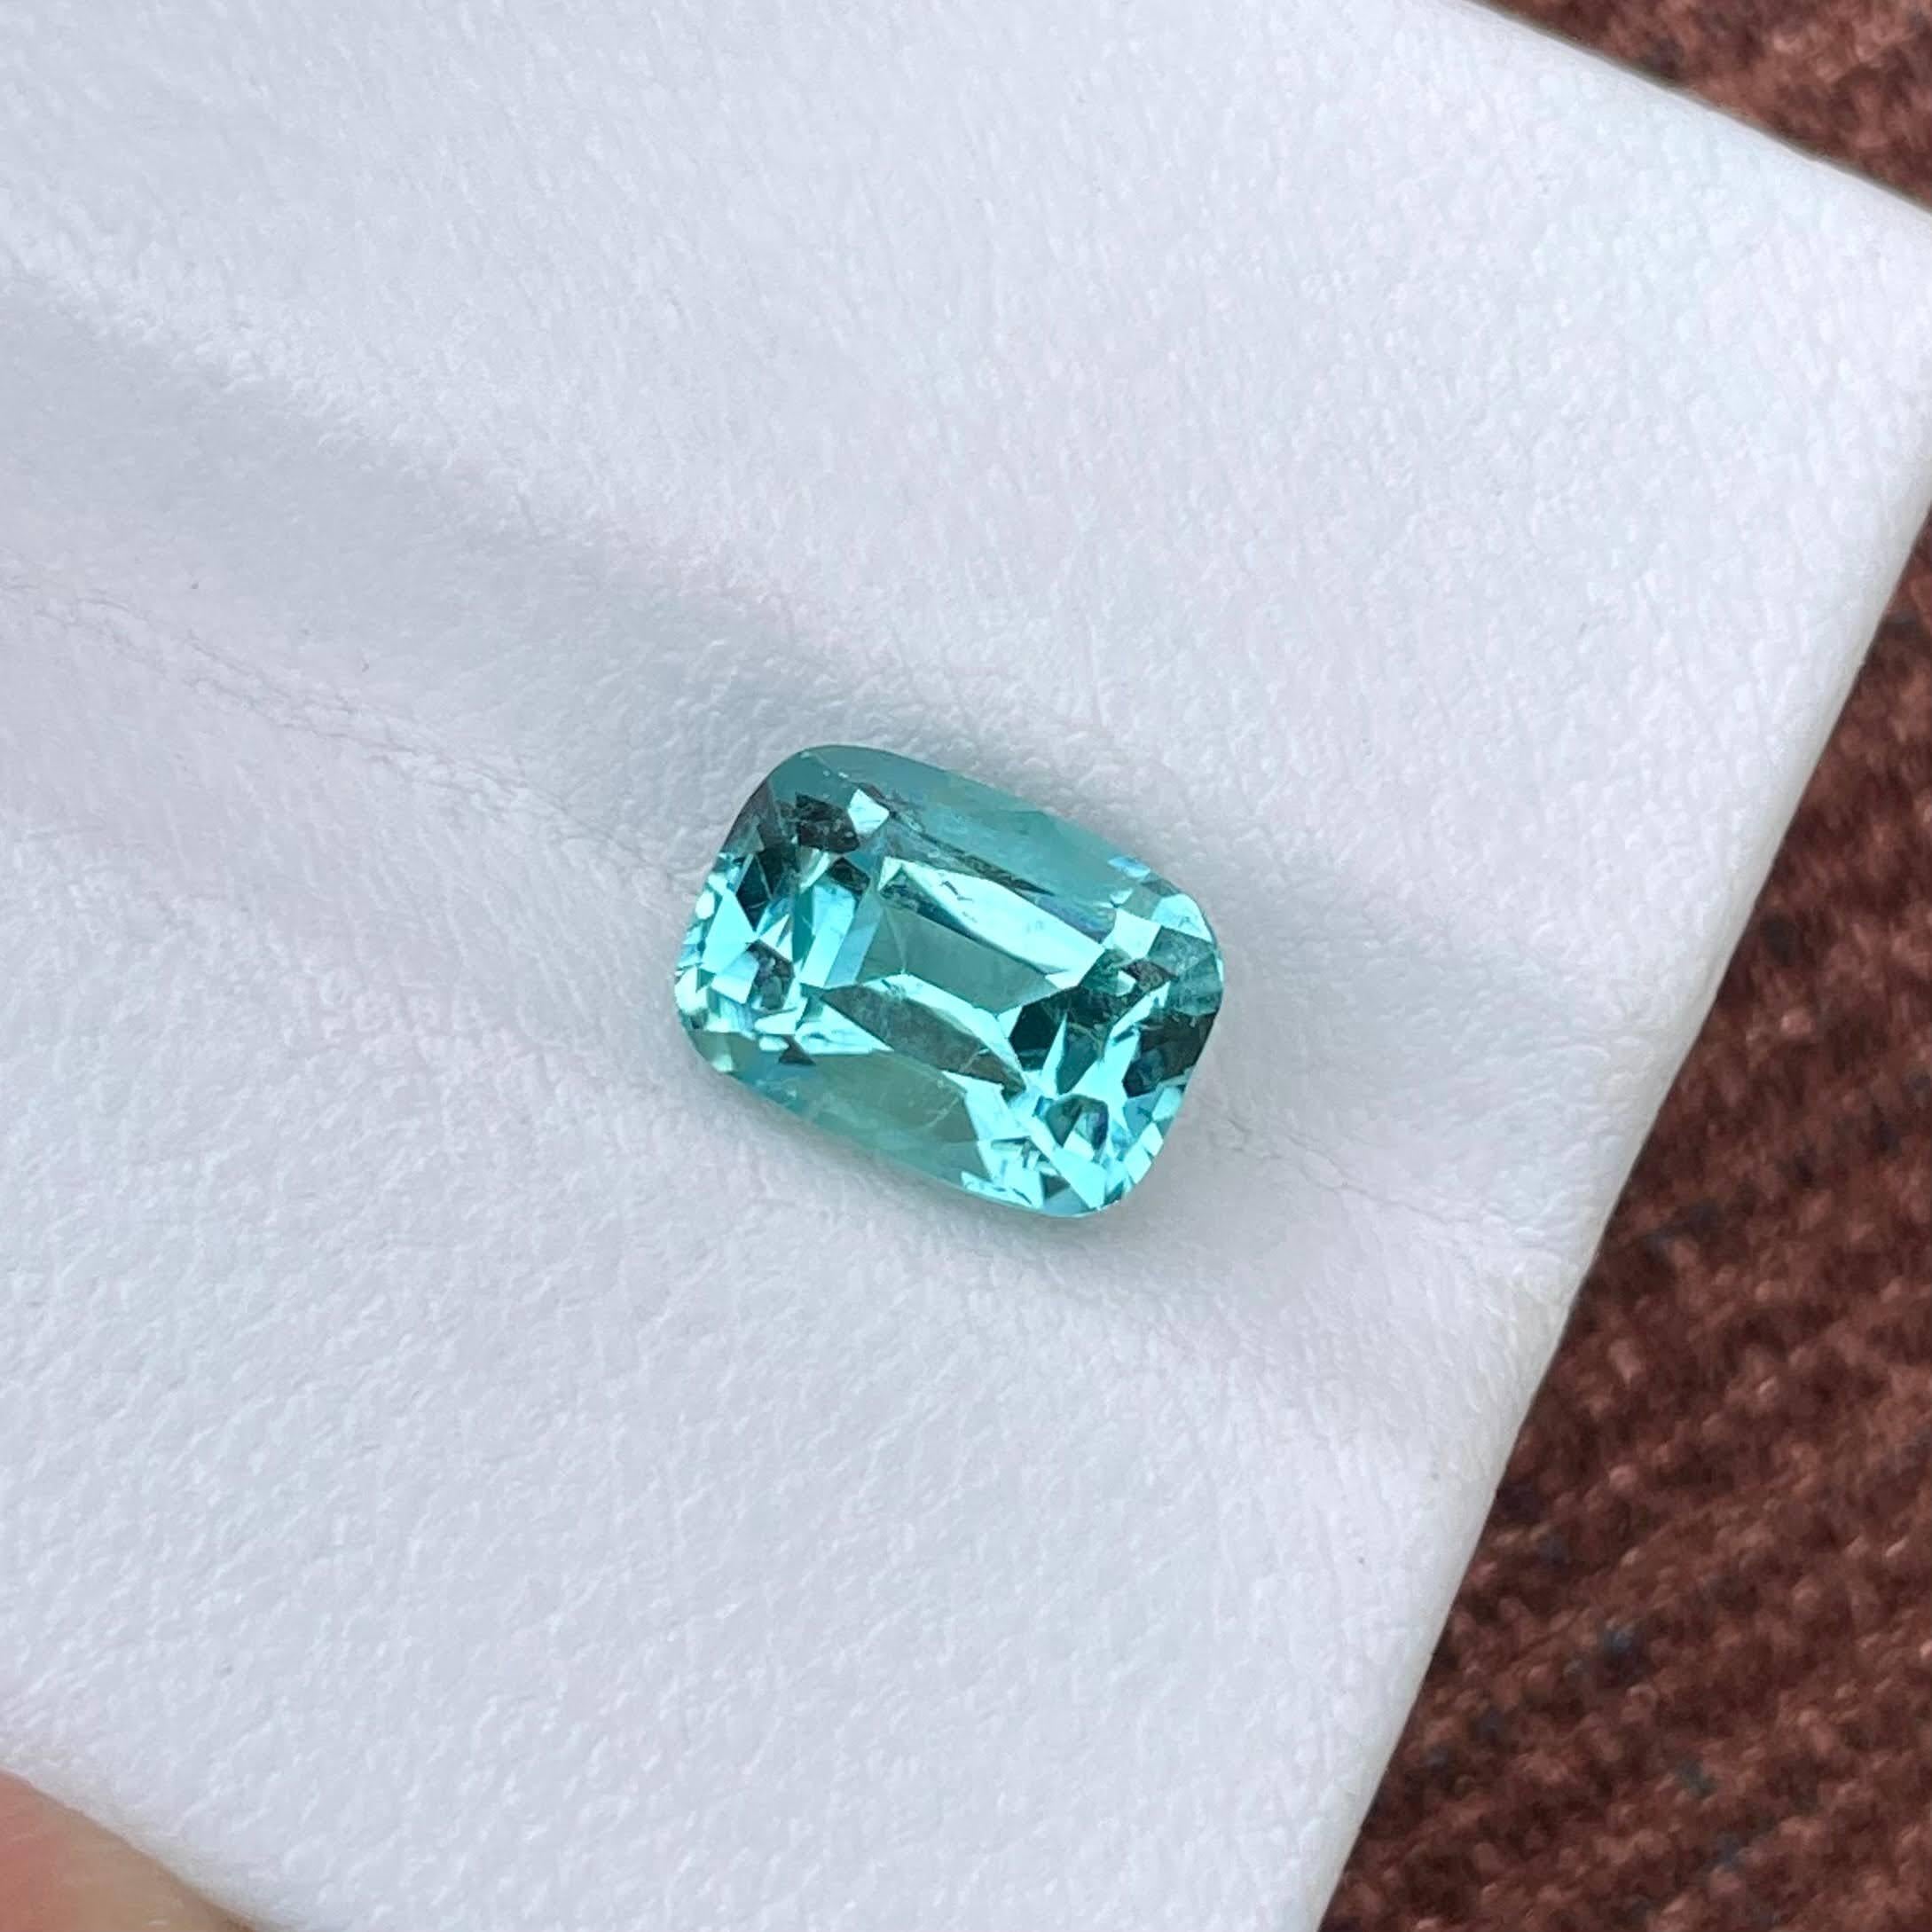 Weight 3.20 carats 
Dimensions 9.5x6.9x6.4 mm
Treatment none 
Origin Afghanistan 
Clarity VVS
Shape cushion 
Cut fancy cushion 




The stunning 3.20 carat Lagoon Blue Tourmaline Stone showcases the enchanting allure of Afghani craftsmanship and